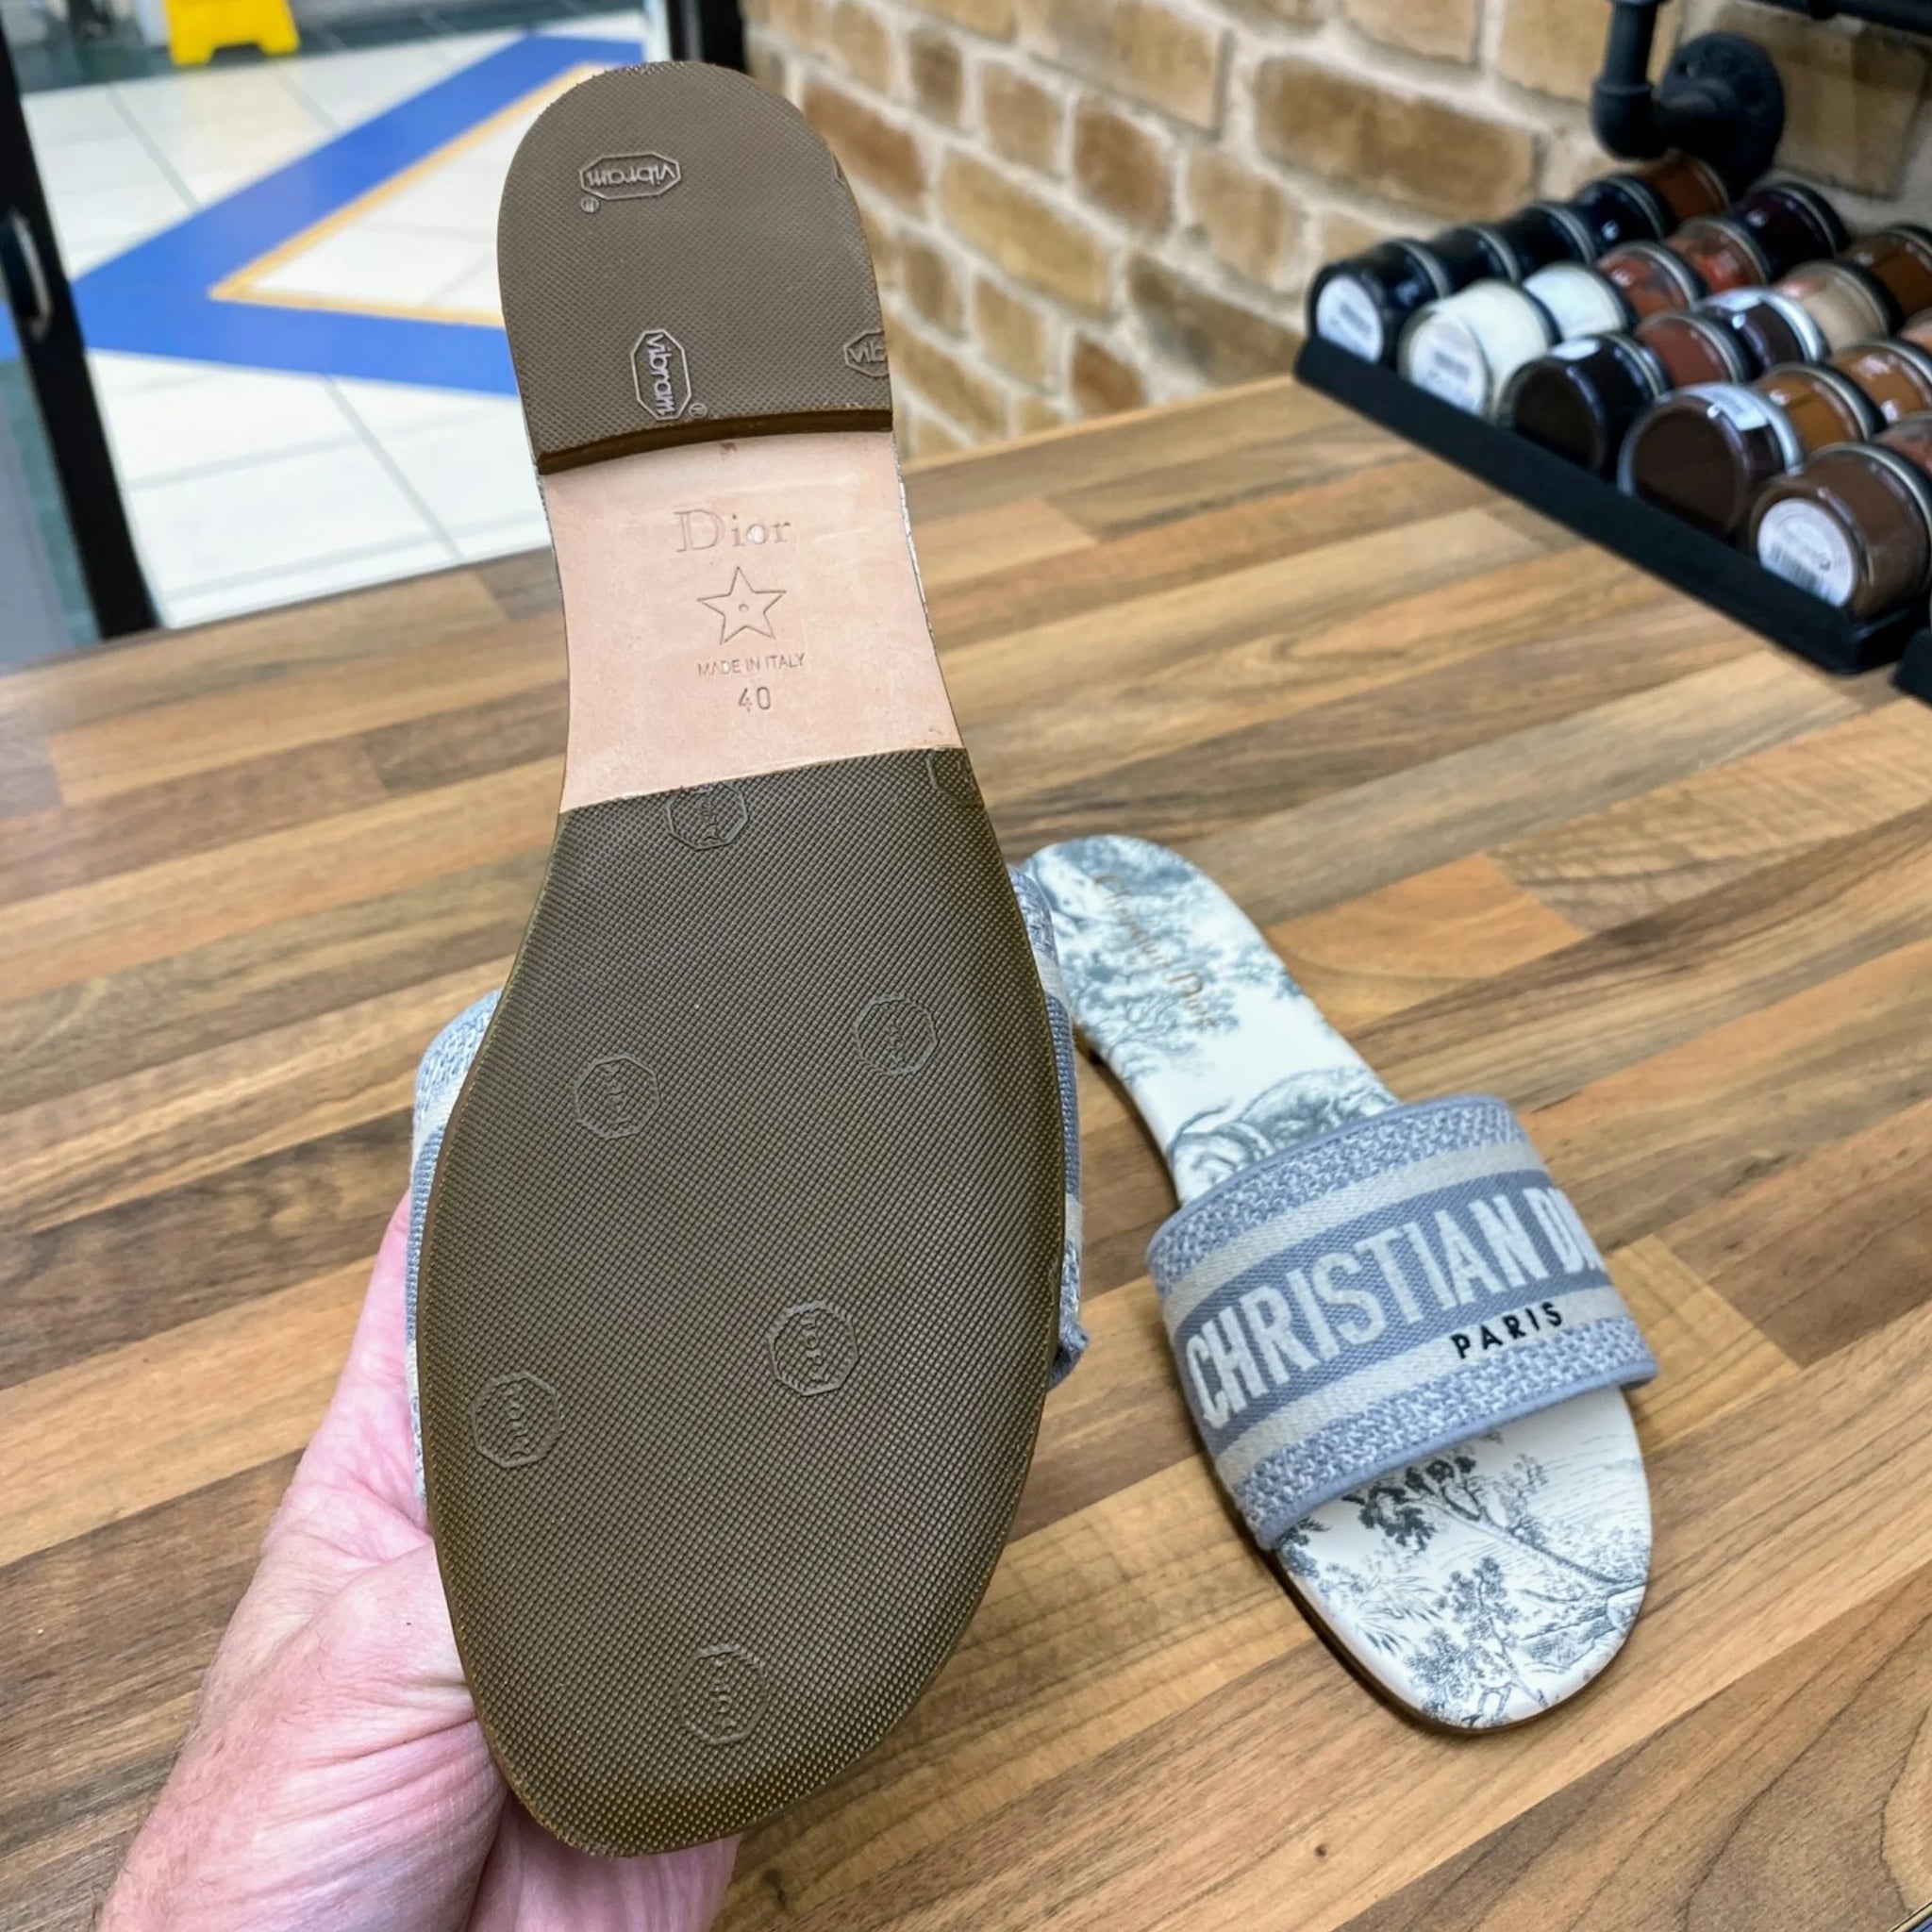 Vibram or Topy Protection Soles on Christian Dior, Christian Louboutin, Jimmy Choo etc